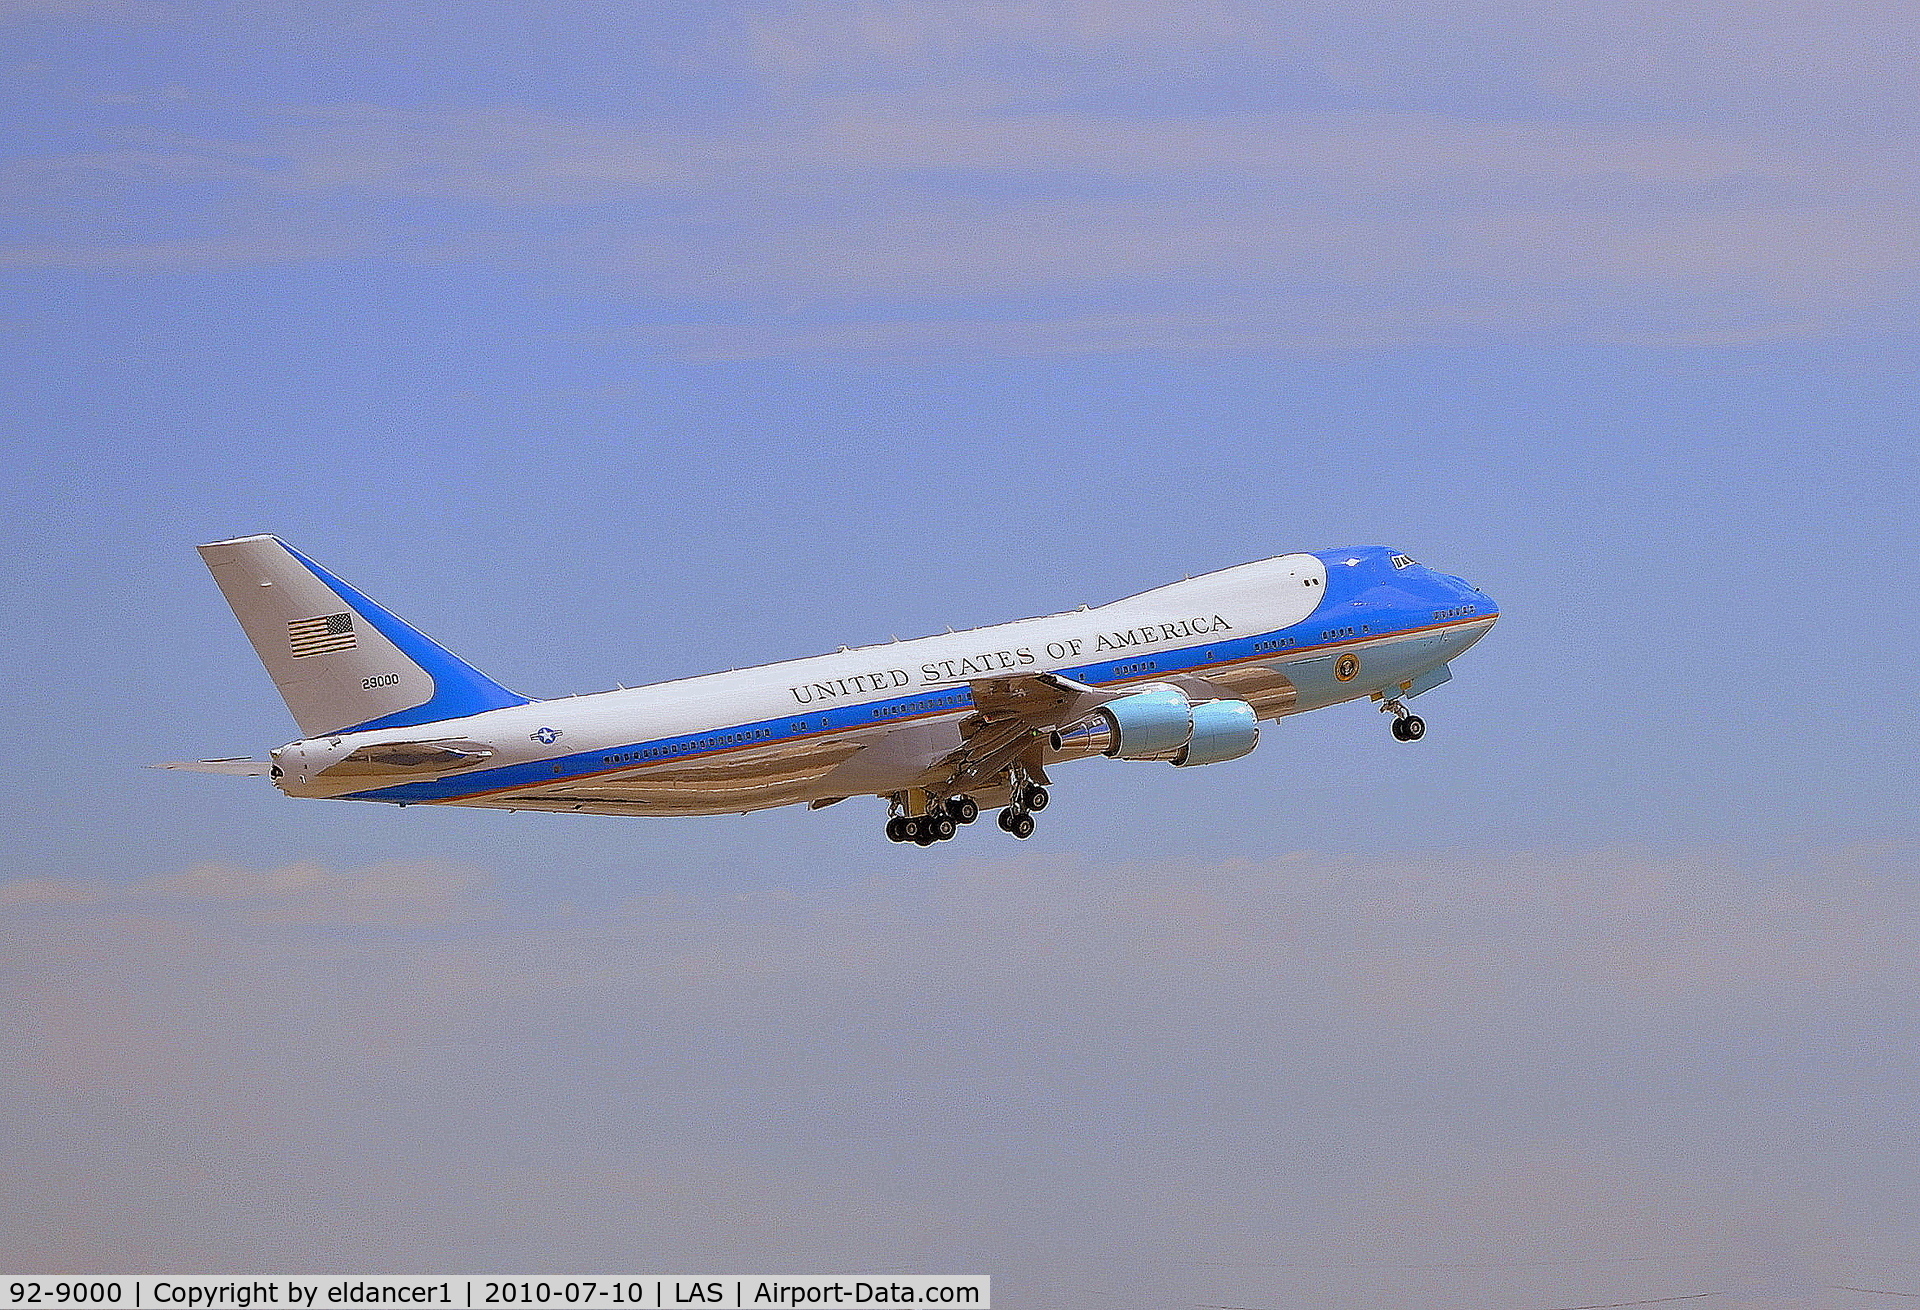 92-9000, 1987 Boeing VC-25A (747-2G4B) C/N 23825, Air Force One taking off from McCarran International Airport.